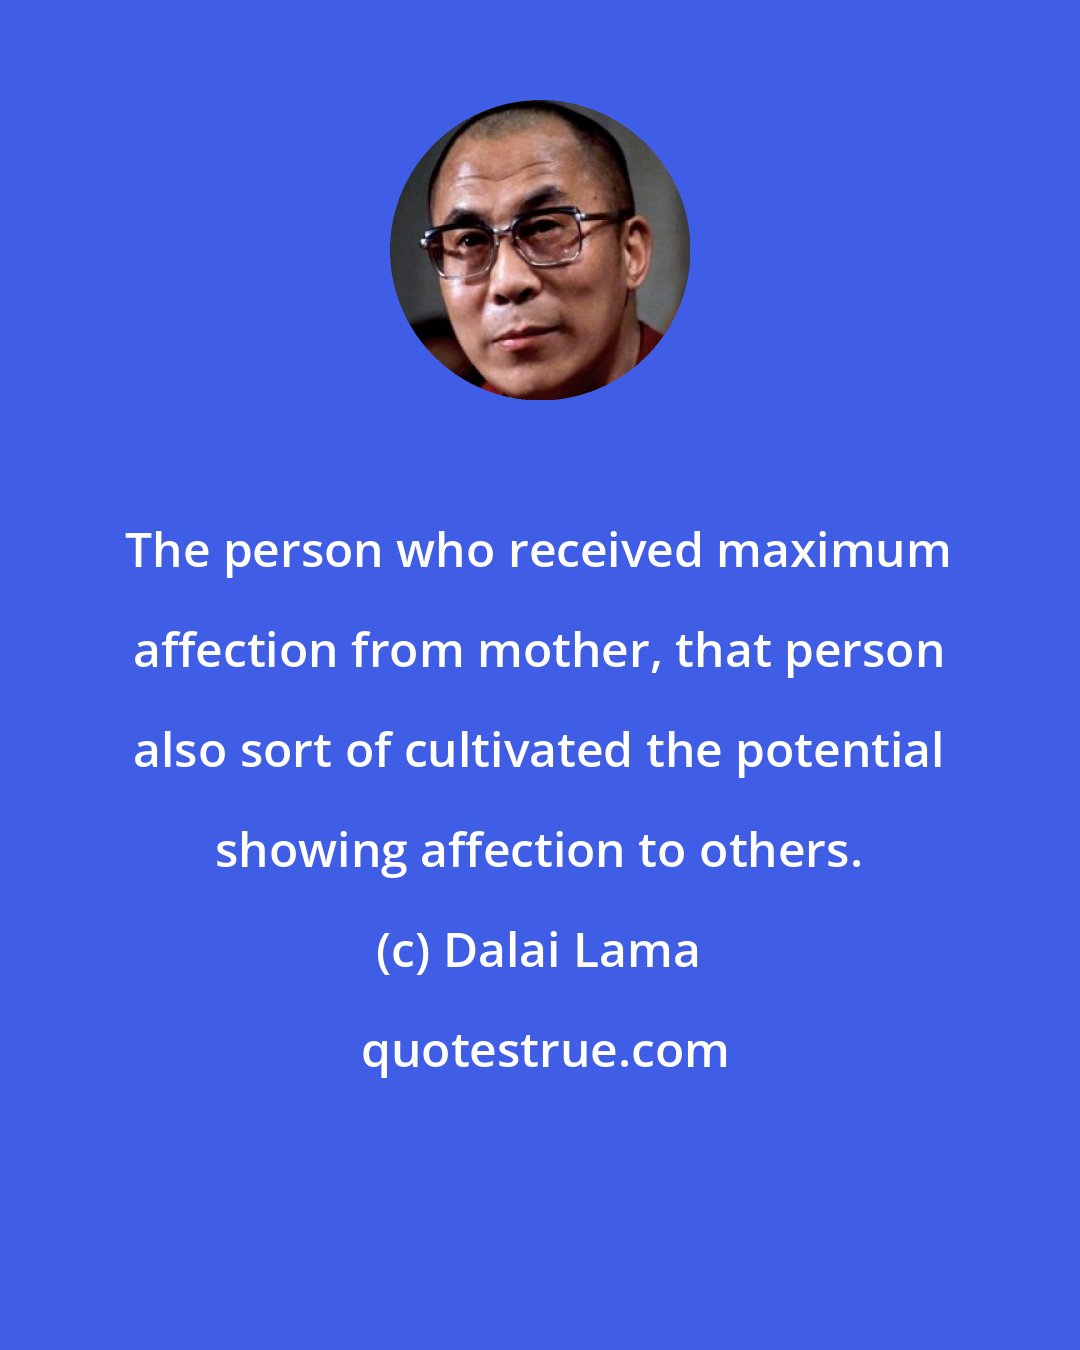 Dalai Lama: The person who received maximum affection from mother, that person also sort of cultivated the potential showing affection to others.